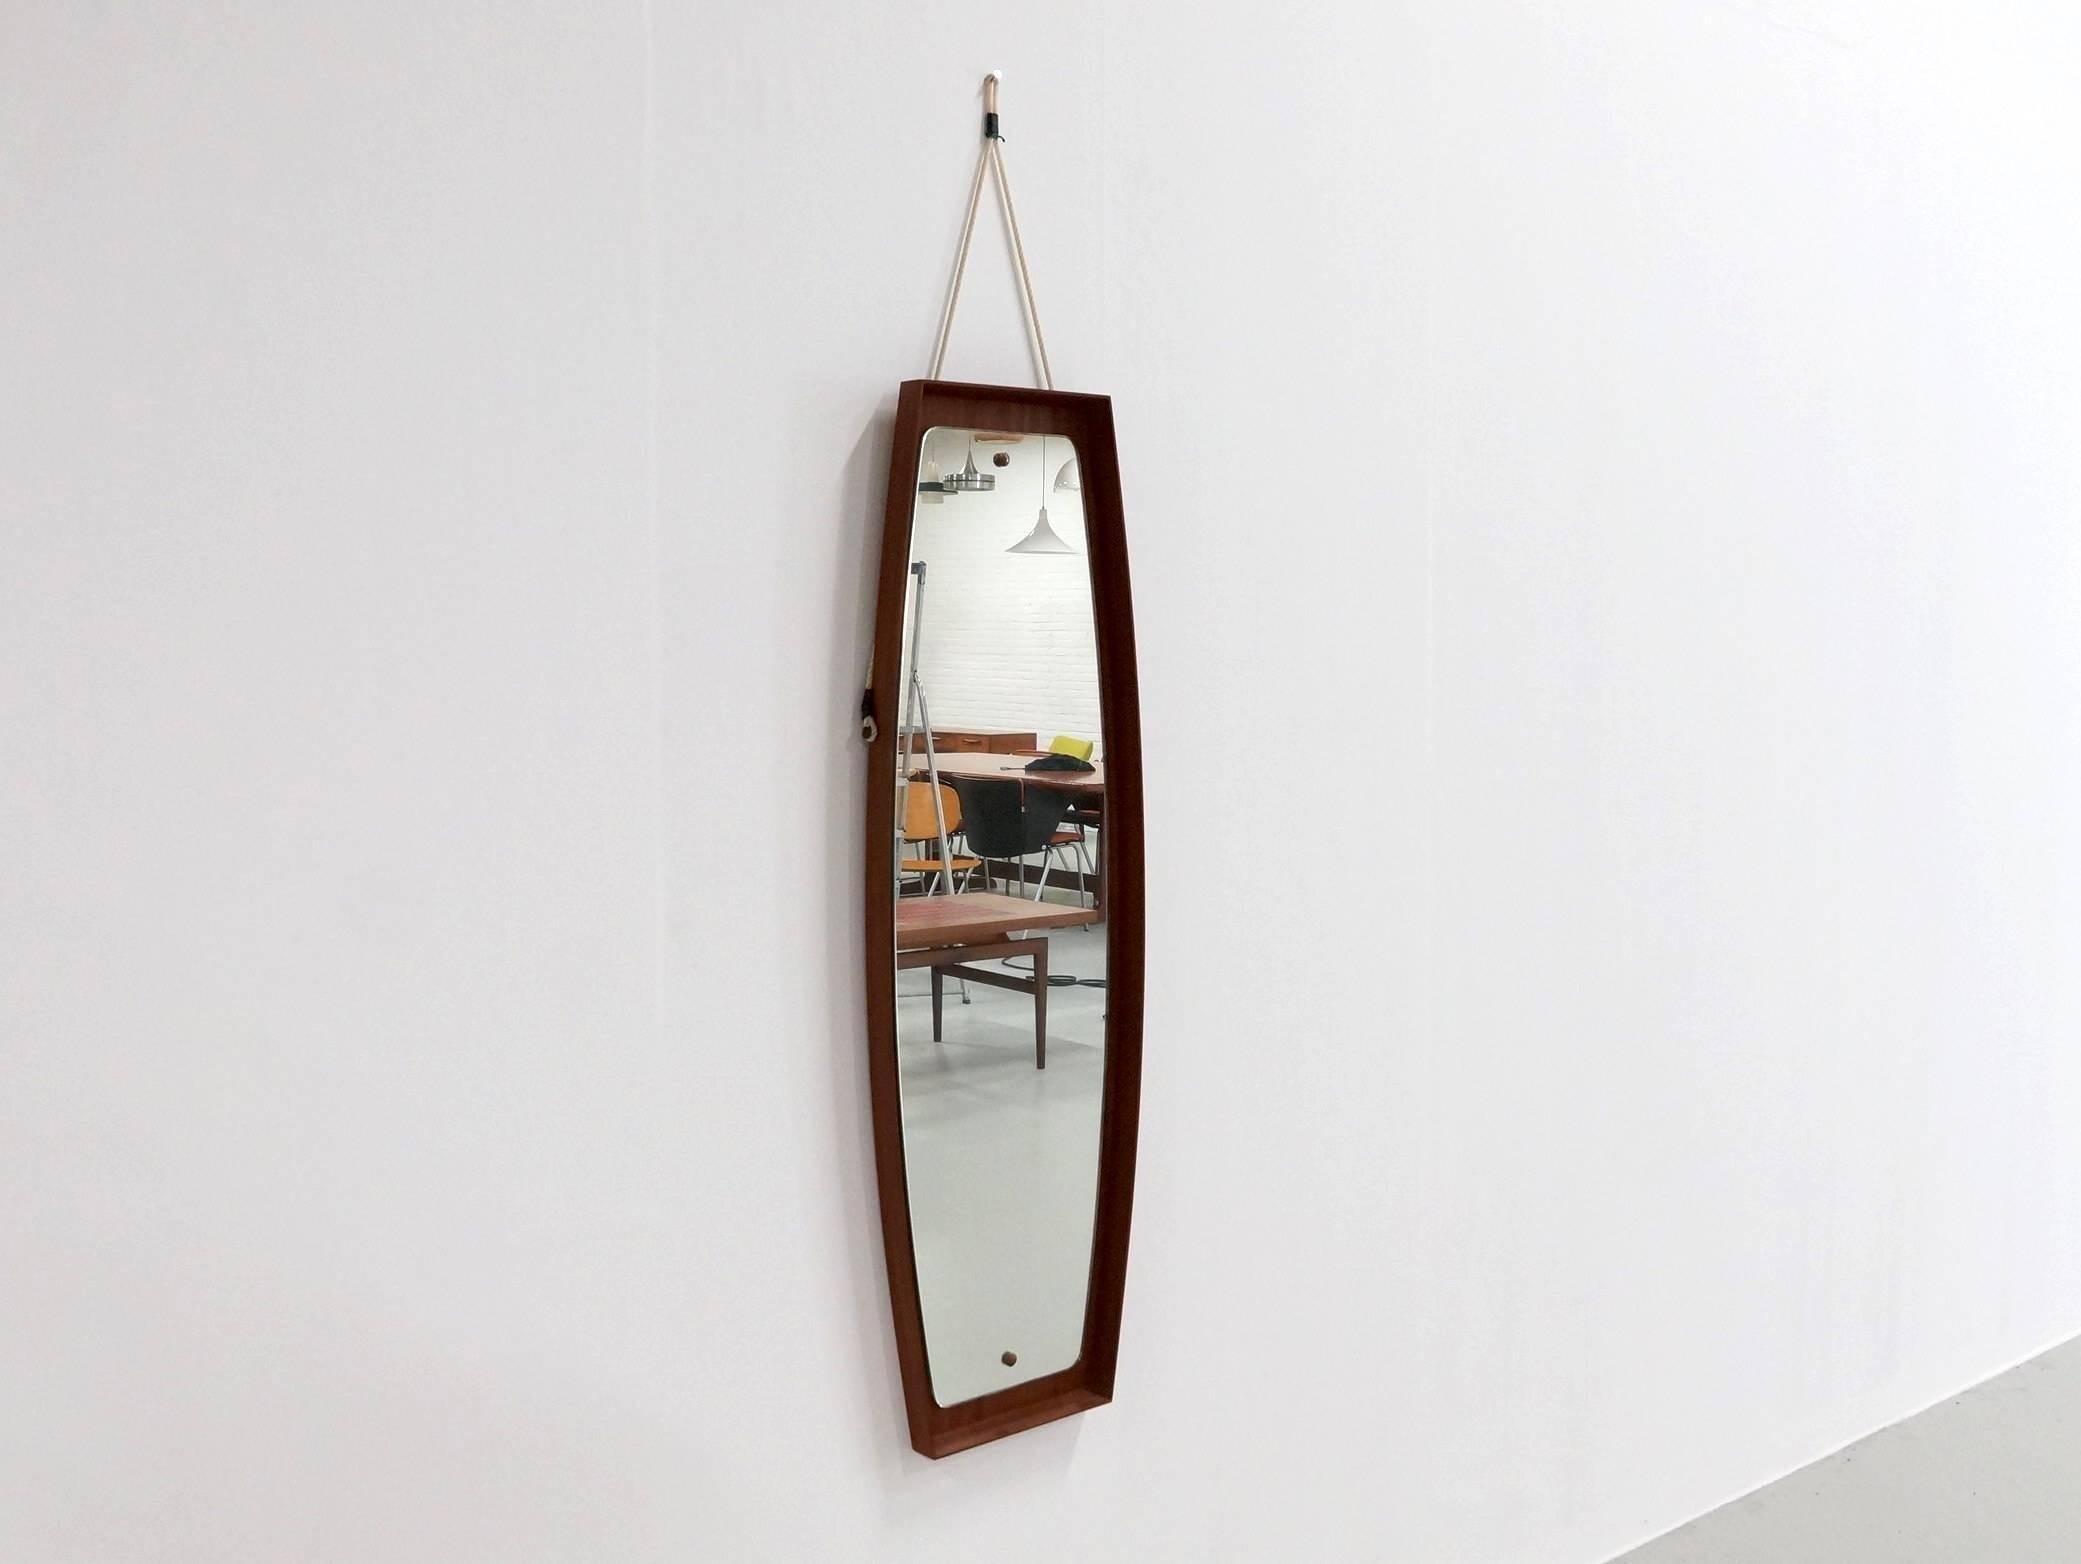 Beautiful large teak wooden frame mirror with white cord that makes it easy to hang on the wall, great for the dress or bed room to see yourself glamour in your nicest outfit.
Dimensions with cord height 158 / from the frame the dimensions are 119